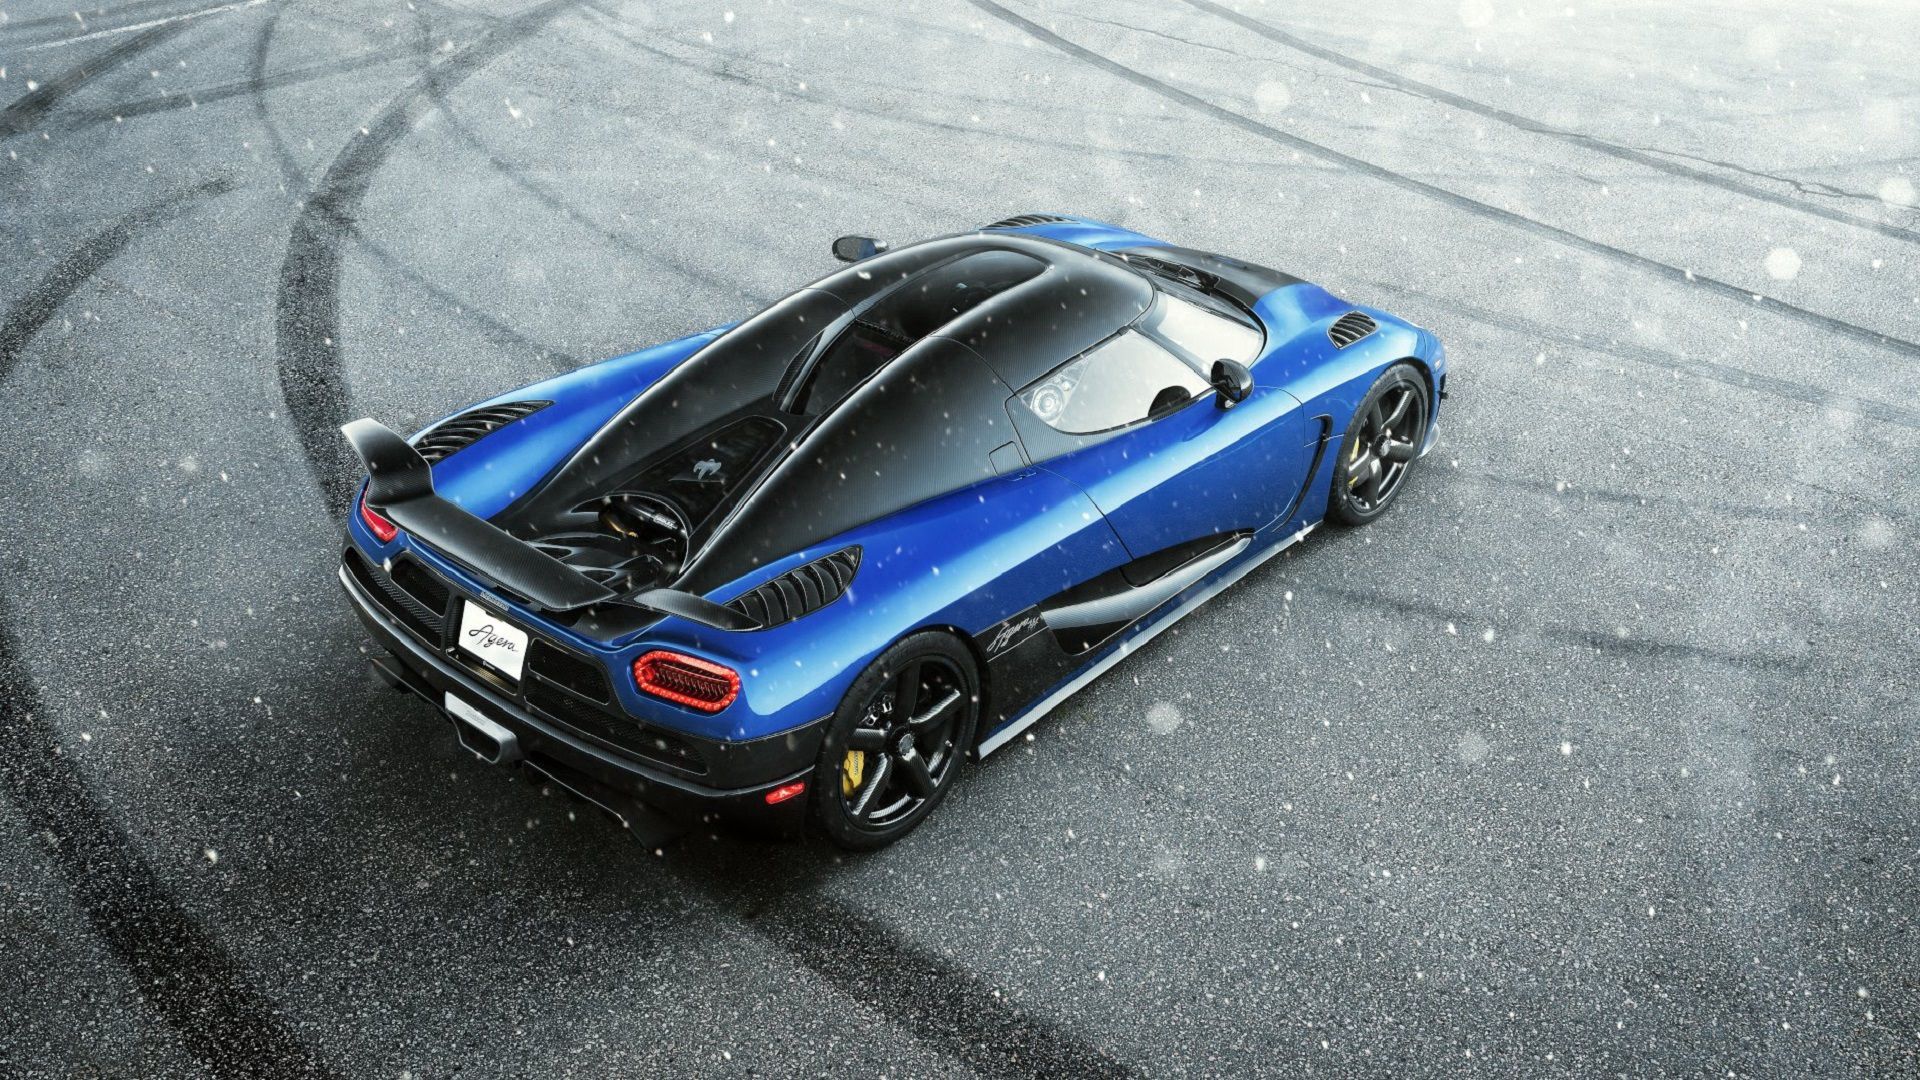 koenigsegg, cars, view from above, agera, hh